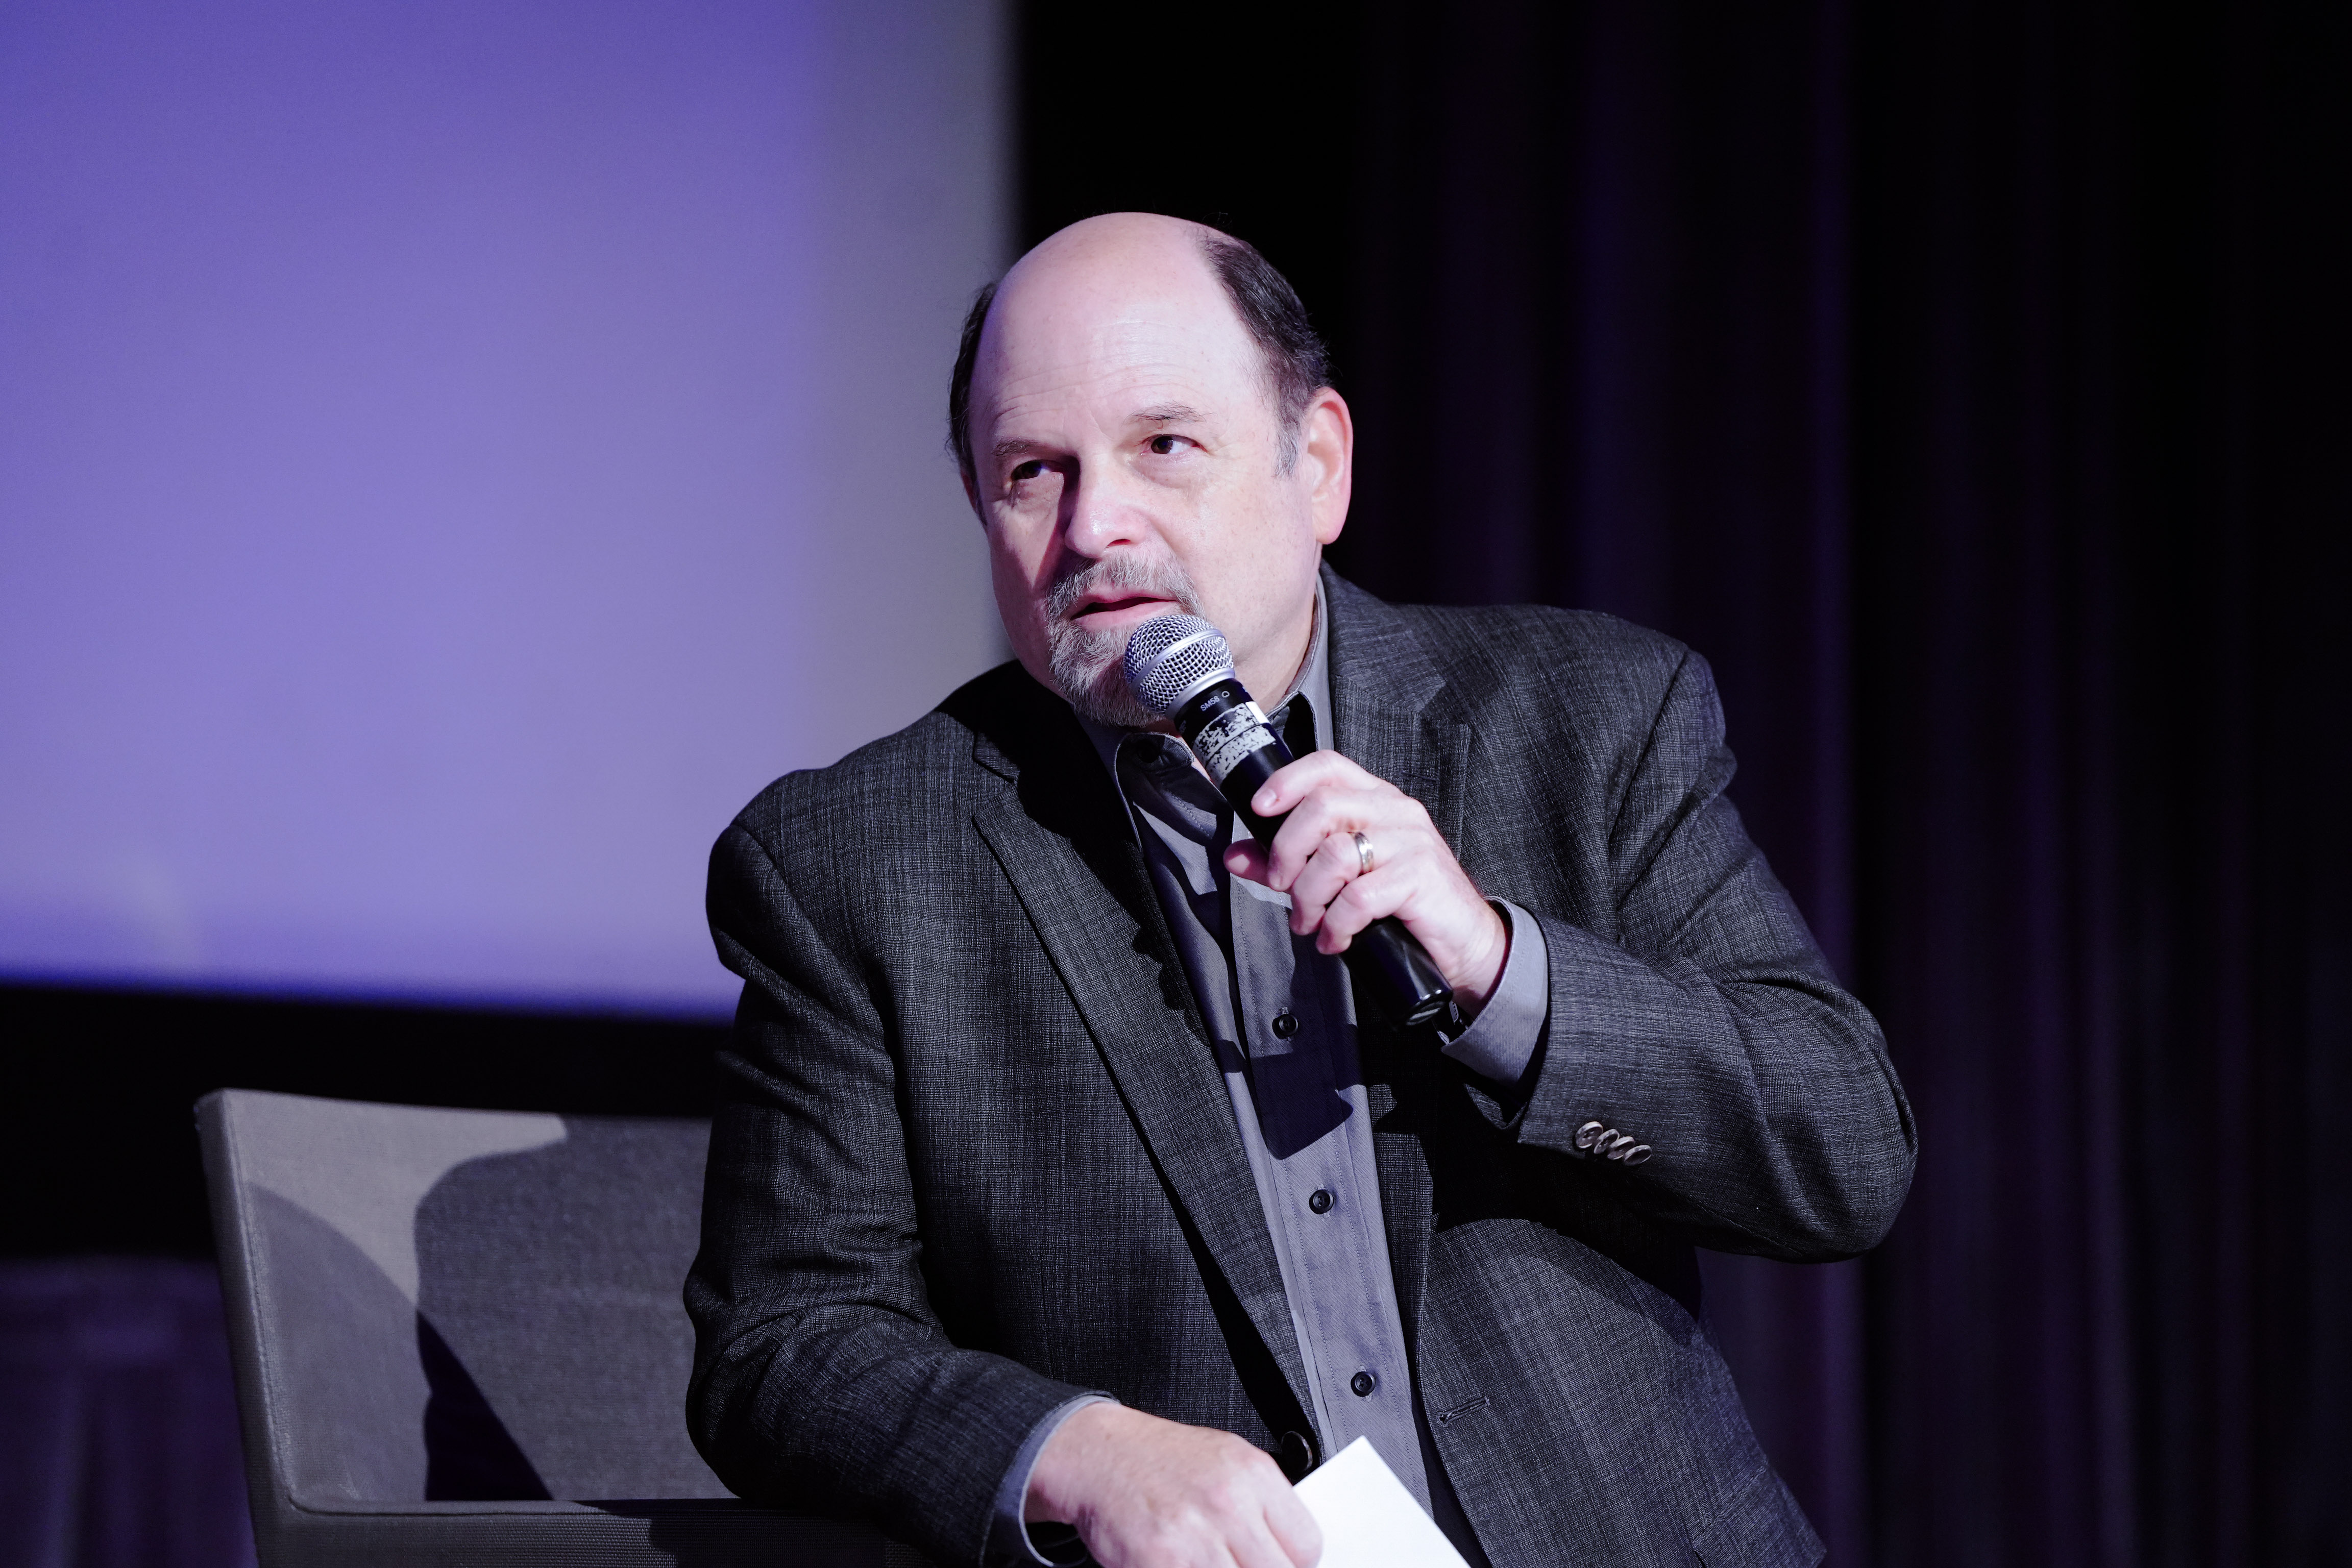 Jason Alexander speaks during the Q&A on the new documentary "William Shatner: You Can Call Me Bill"